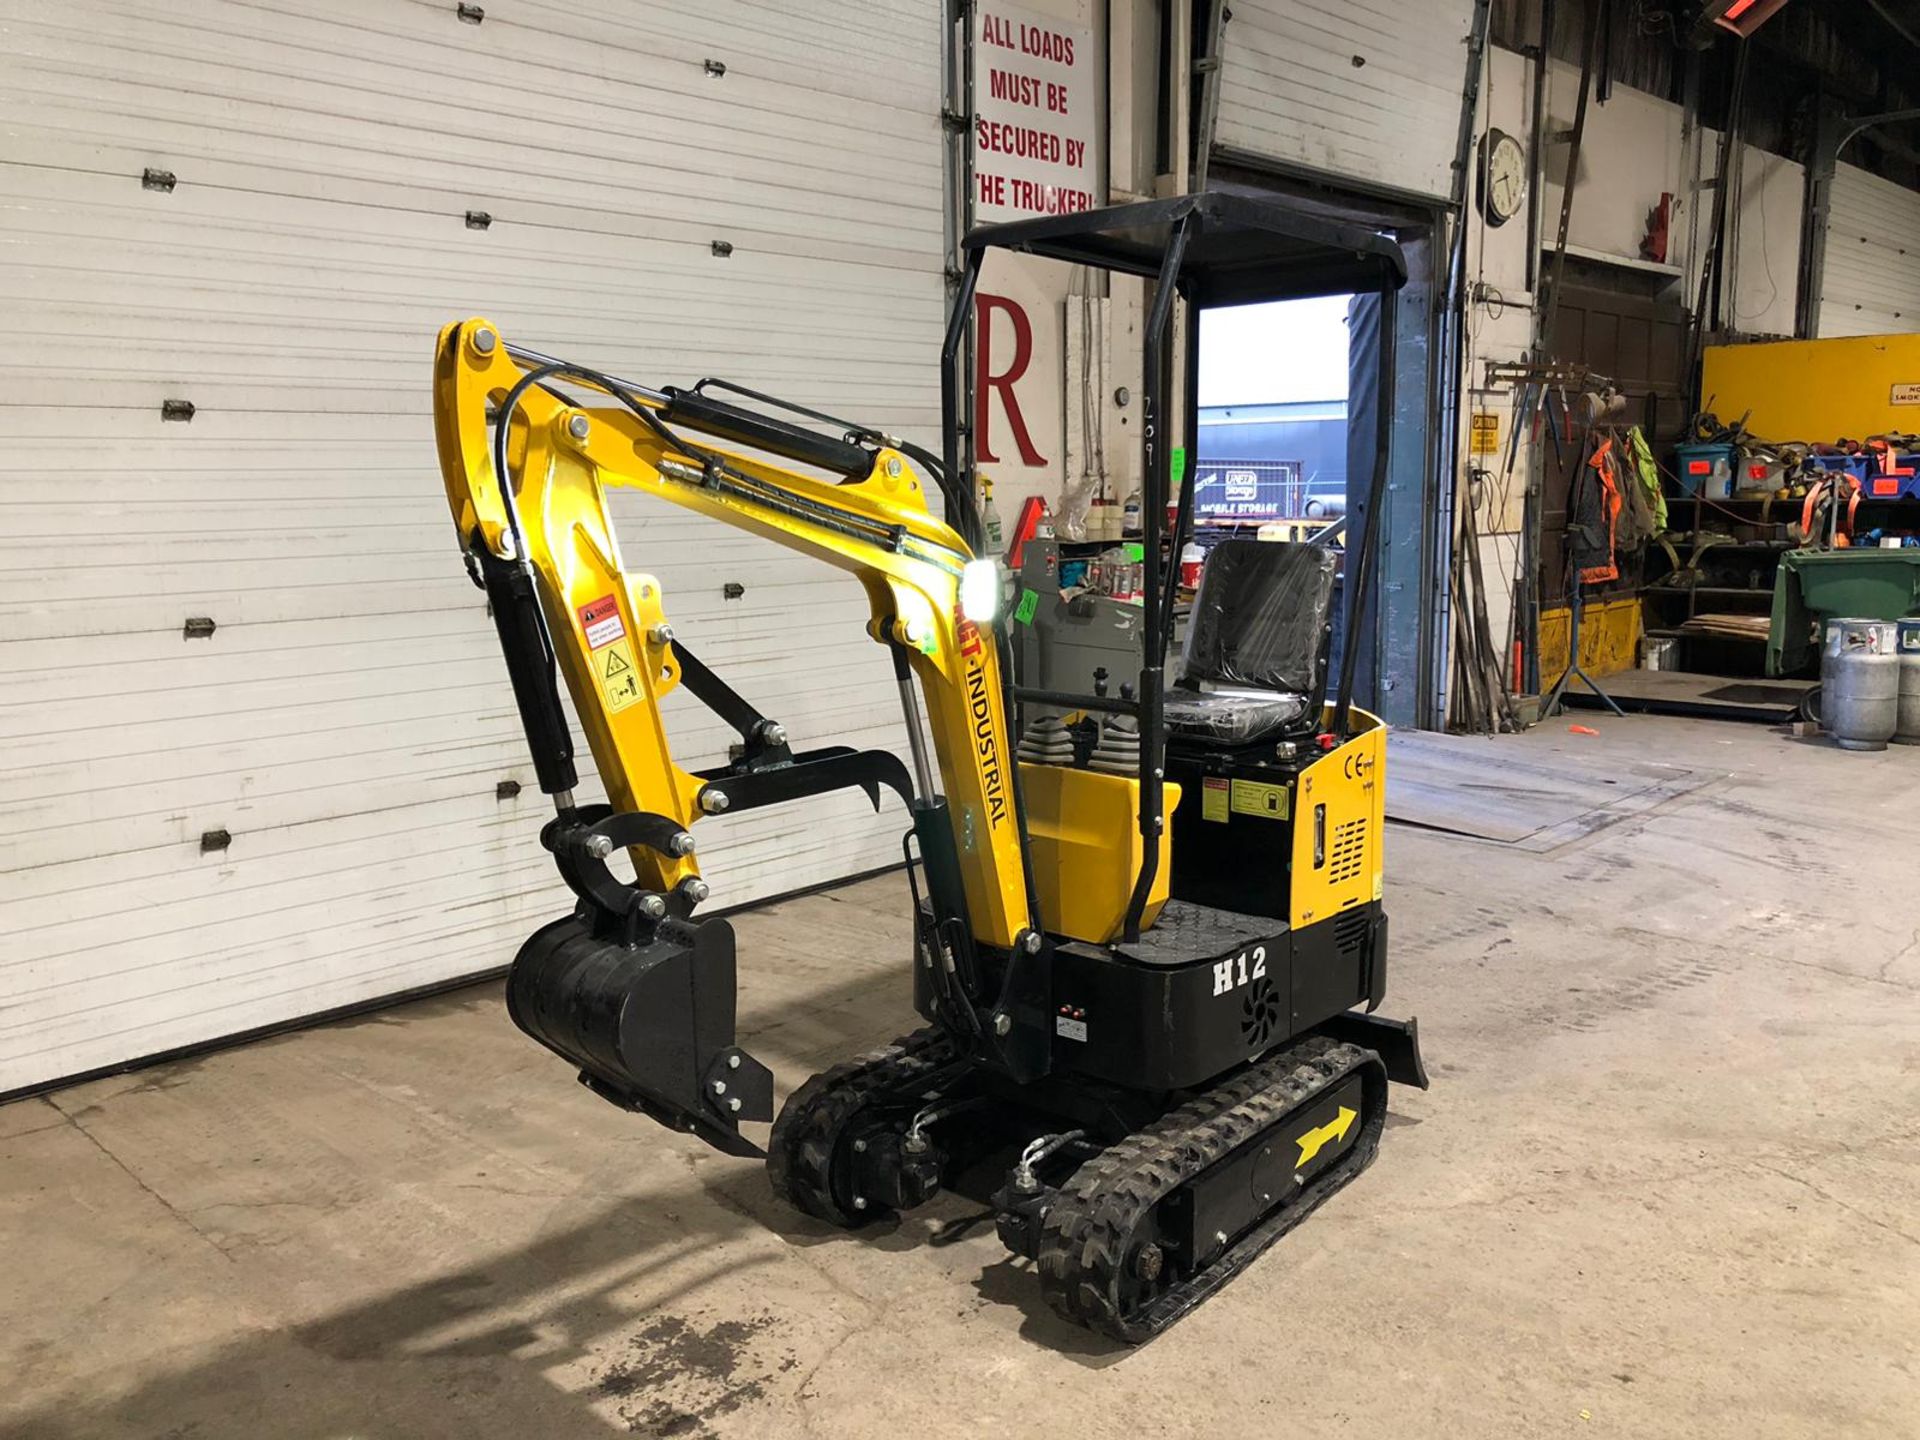 2022 AGT Industrial MINI Crawler Excavator model H12 - NEW MACHINE 0 Hours - Gas with Rubber Tracks, - Image 3 of 6